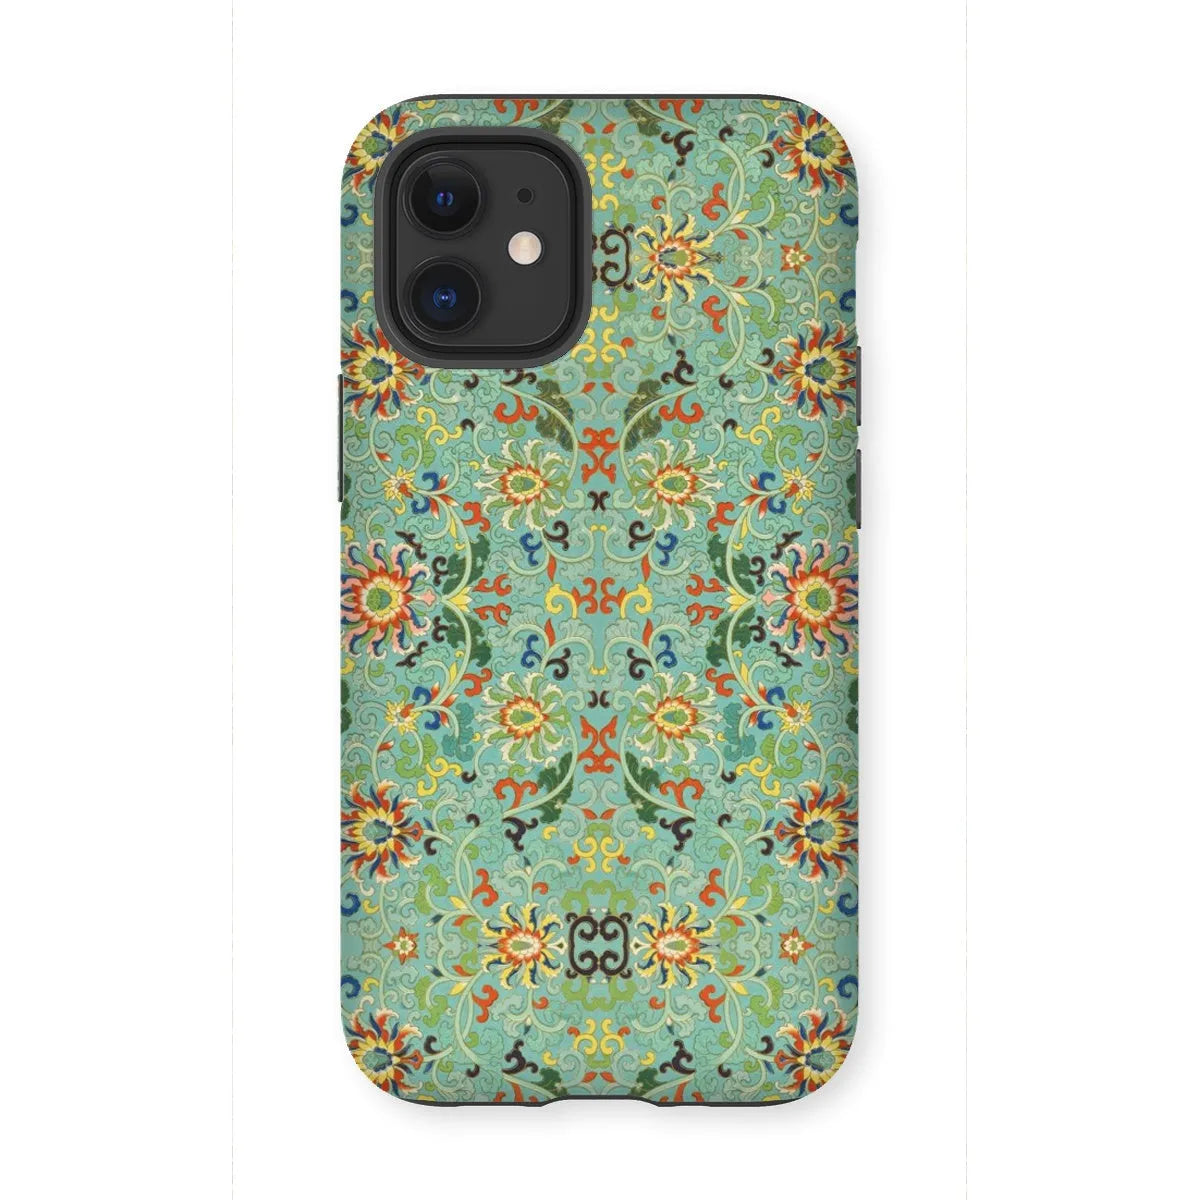 Lotus Candy - Chinese Aesthetic Pattern Art Phone Case - Iphone 12 Mini / Matte - Mobile Phone Cases - Aesthetic Art